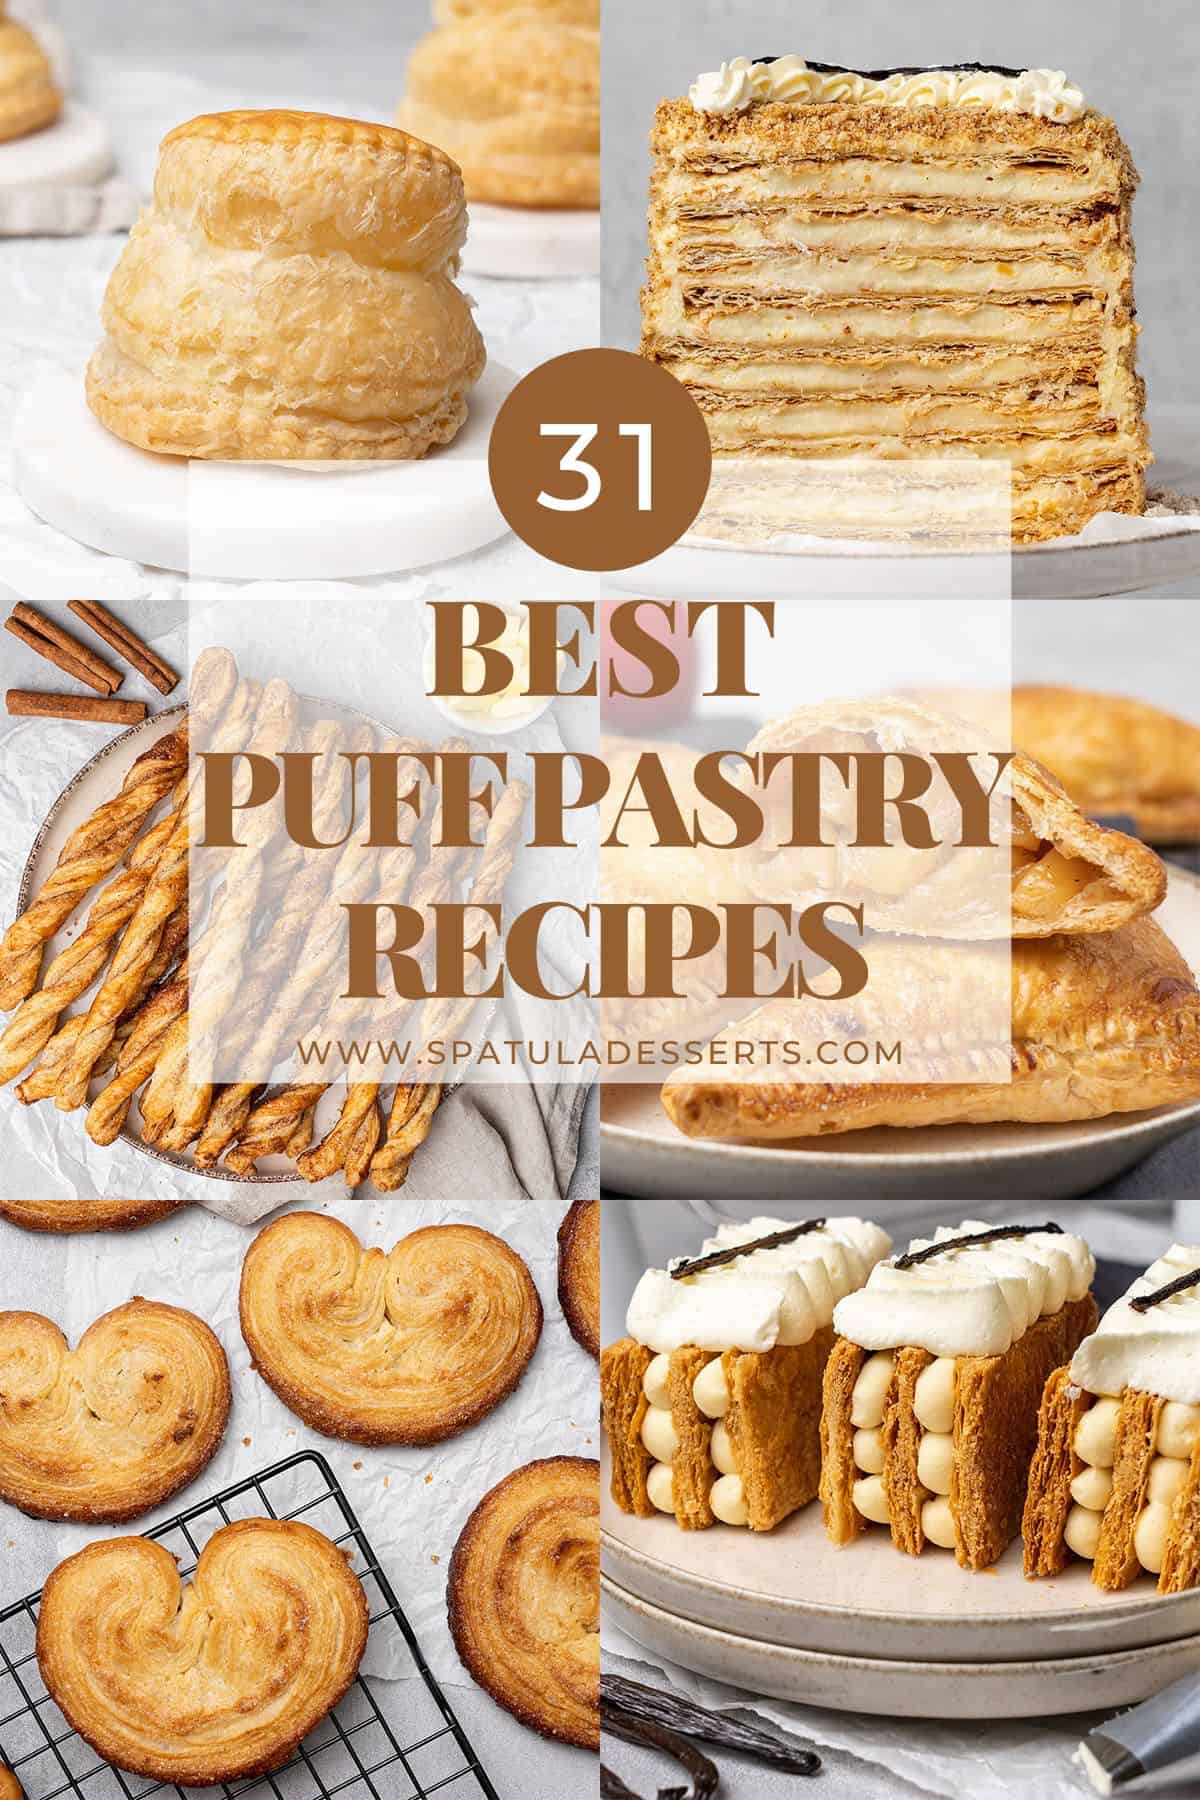 Puff pastry recipes collage.